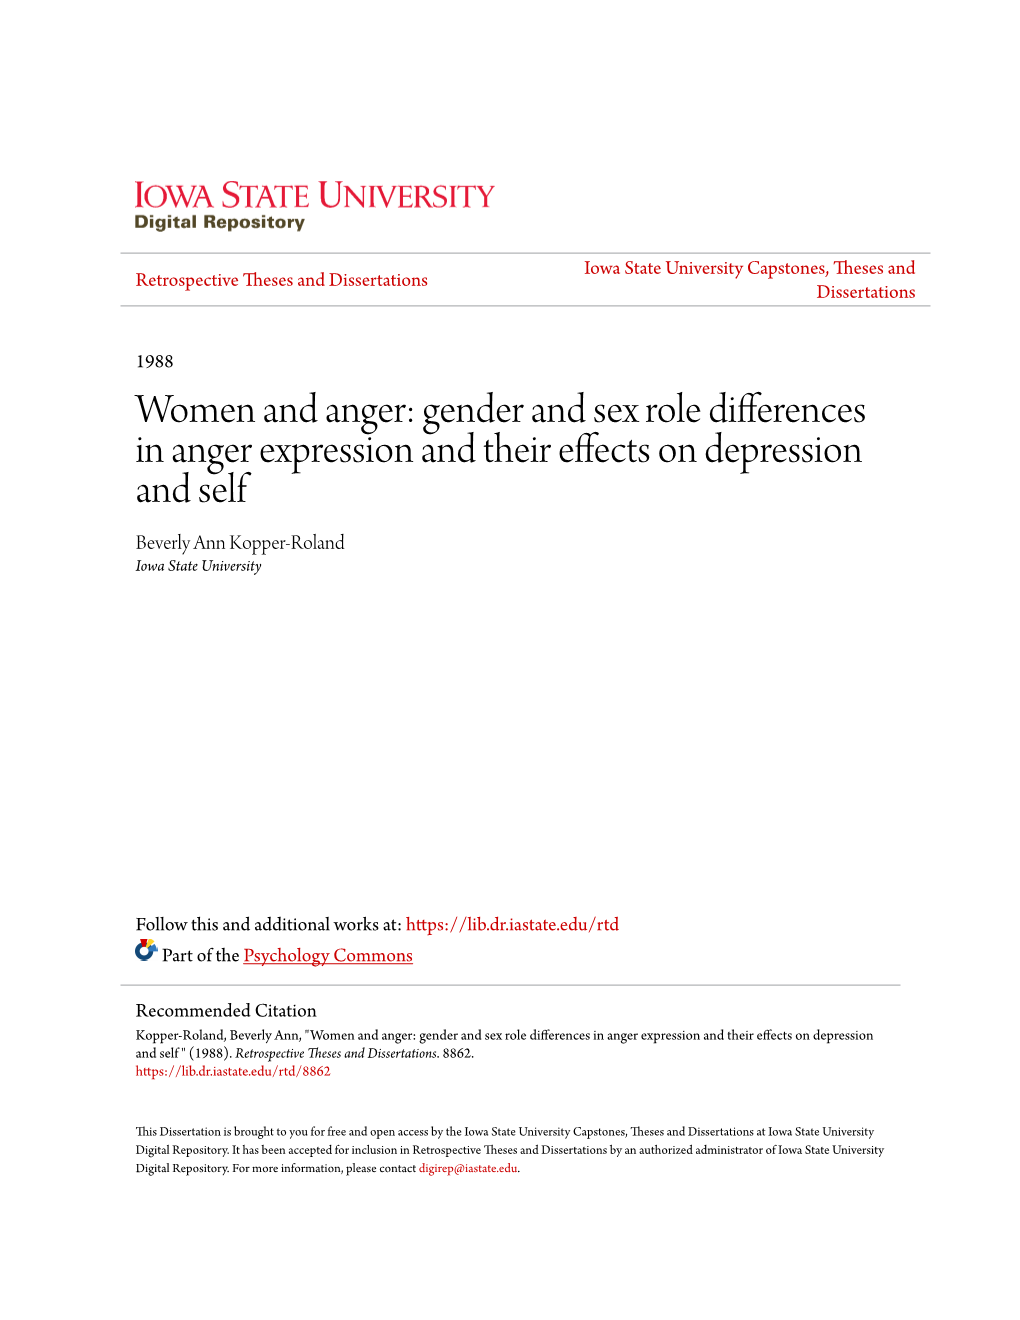 Women and Anger: Gender and Sex Role Differences in Anger Expression and Their Effects on Depression and Self Beverly Ann Kopper-Roland Iowa State University